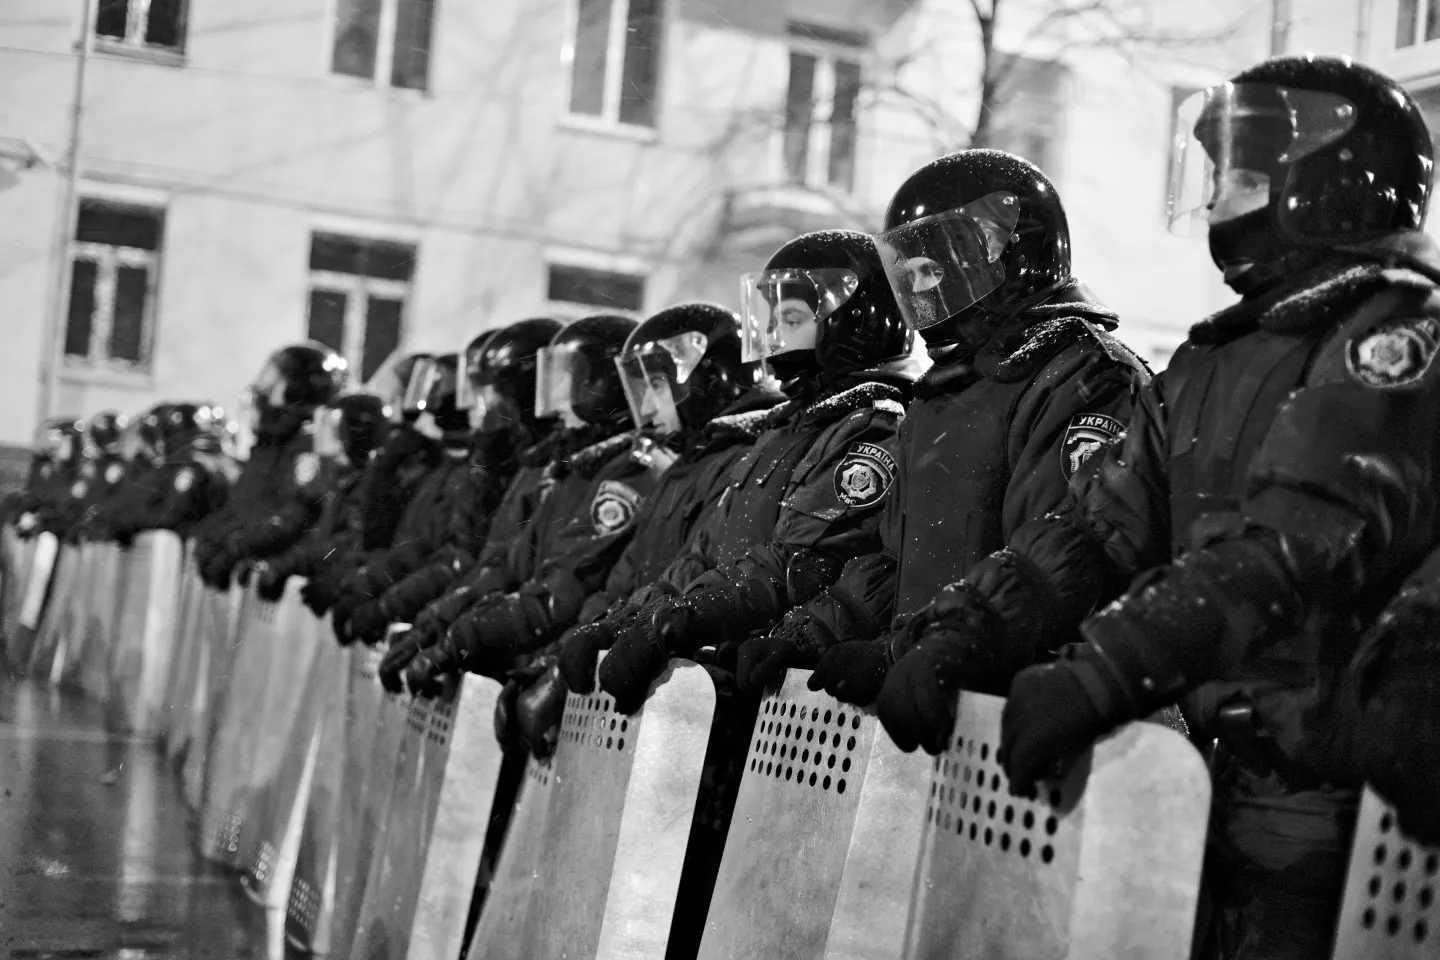 To the Police State, We’re All Criminals Until We Prove Otherwise